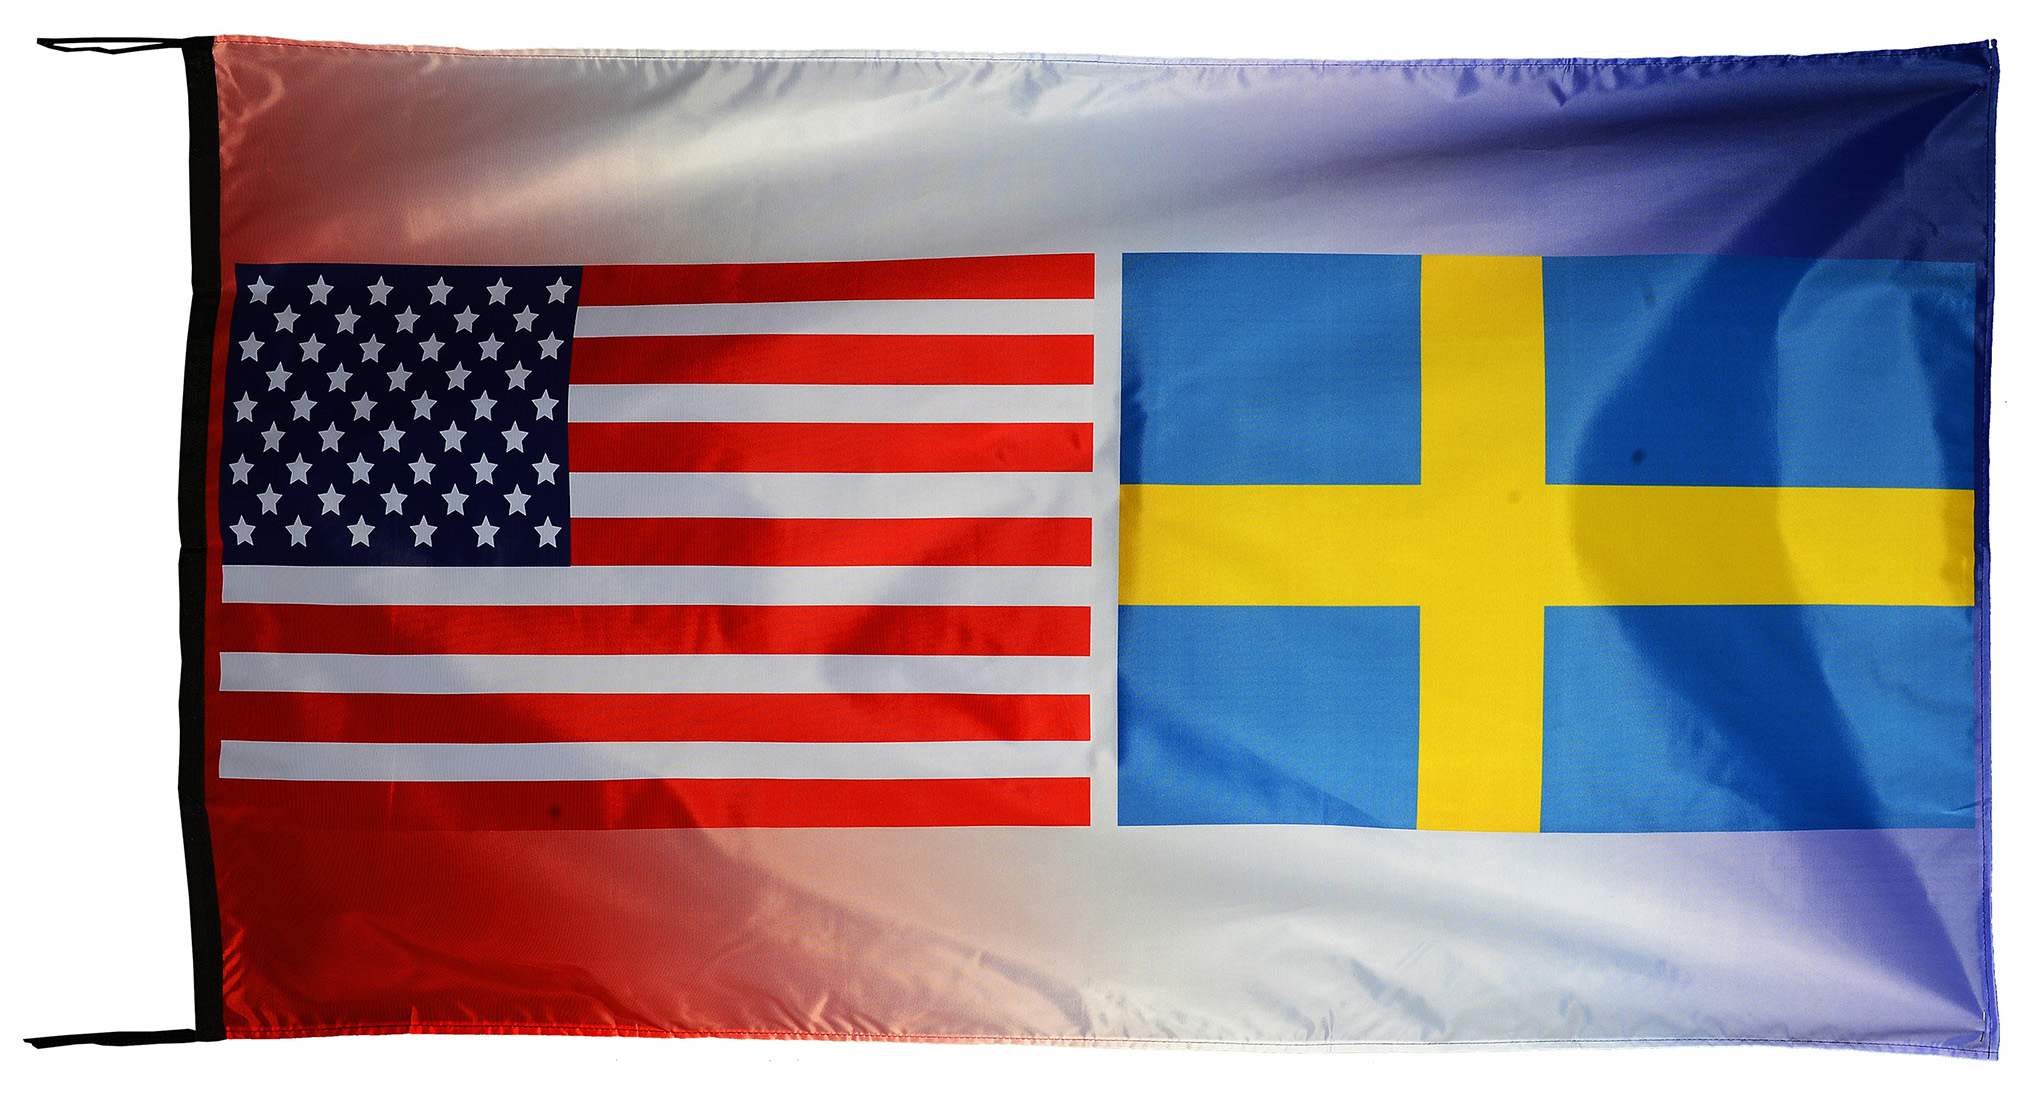 Flag  143 USA / US Country / United States Of America and Sweden (Swedish) / Patriotic / Pride Hybrid Weather-Resistant Polyester Outdoor Flag Landscape Banner / Vivid Colors / 3 X 5 FT (150 x 90cm) International Flags for Sale